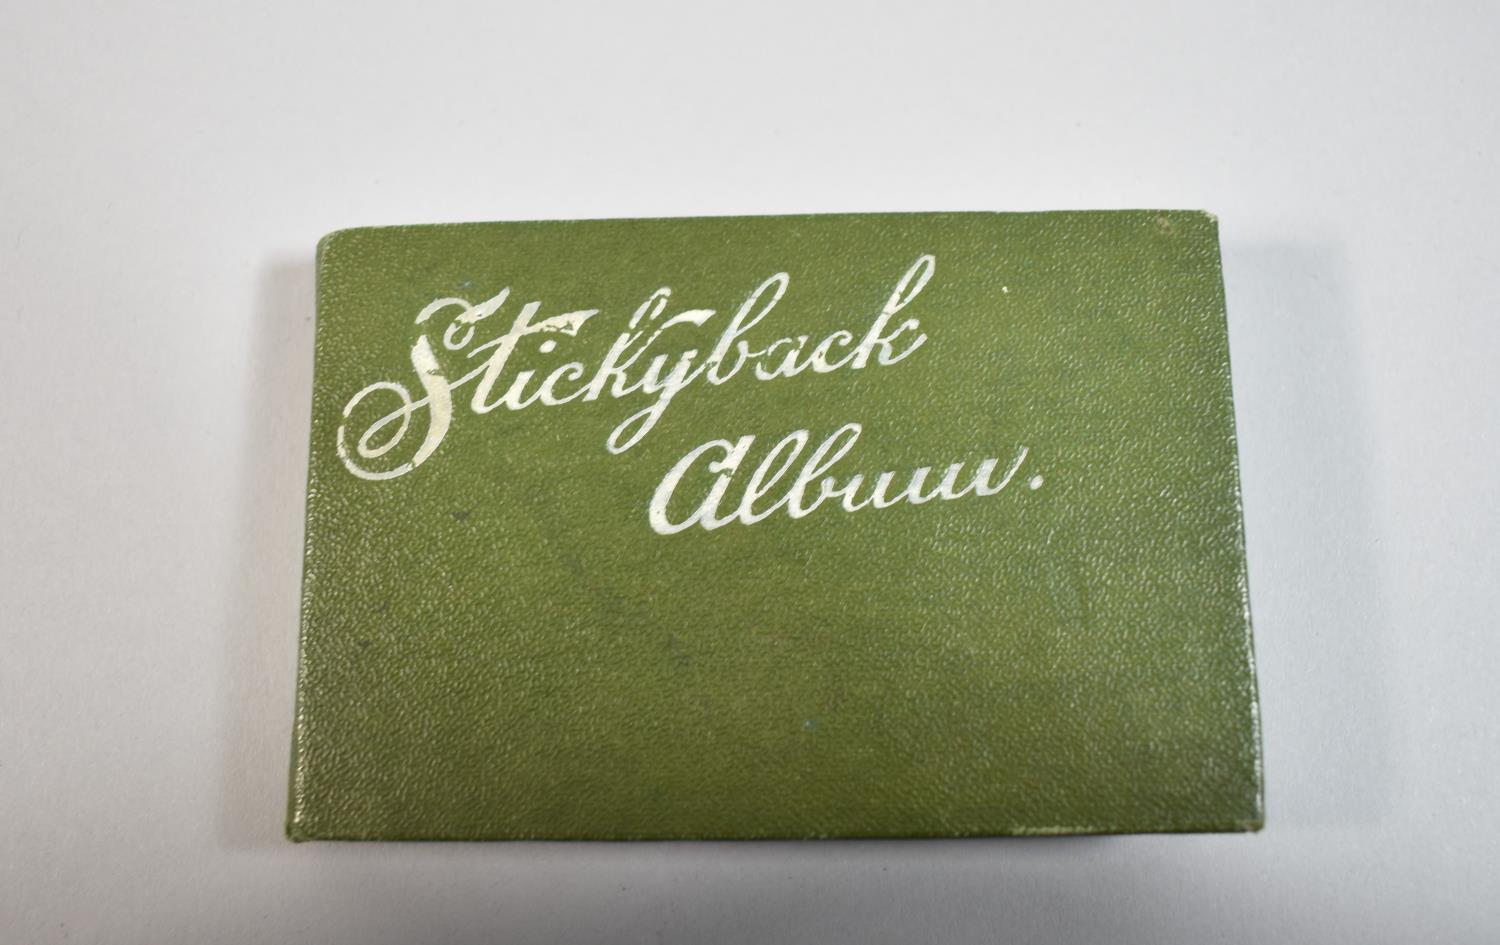 A Small Stickyback Album Containing Risque Photographs of Girl, Mid 20th Century